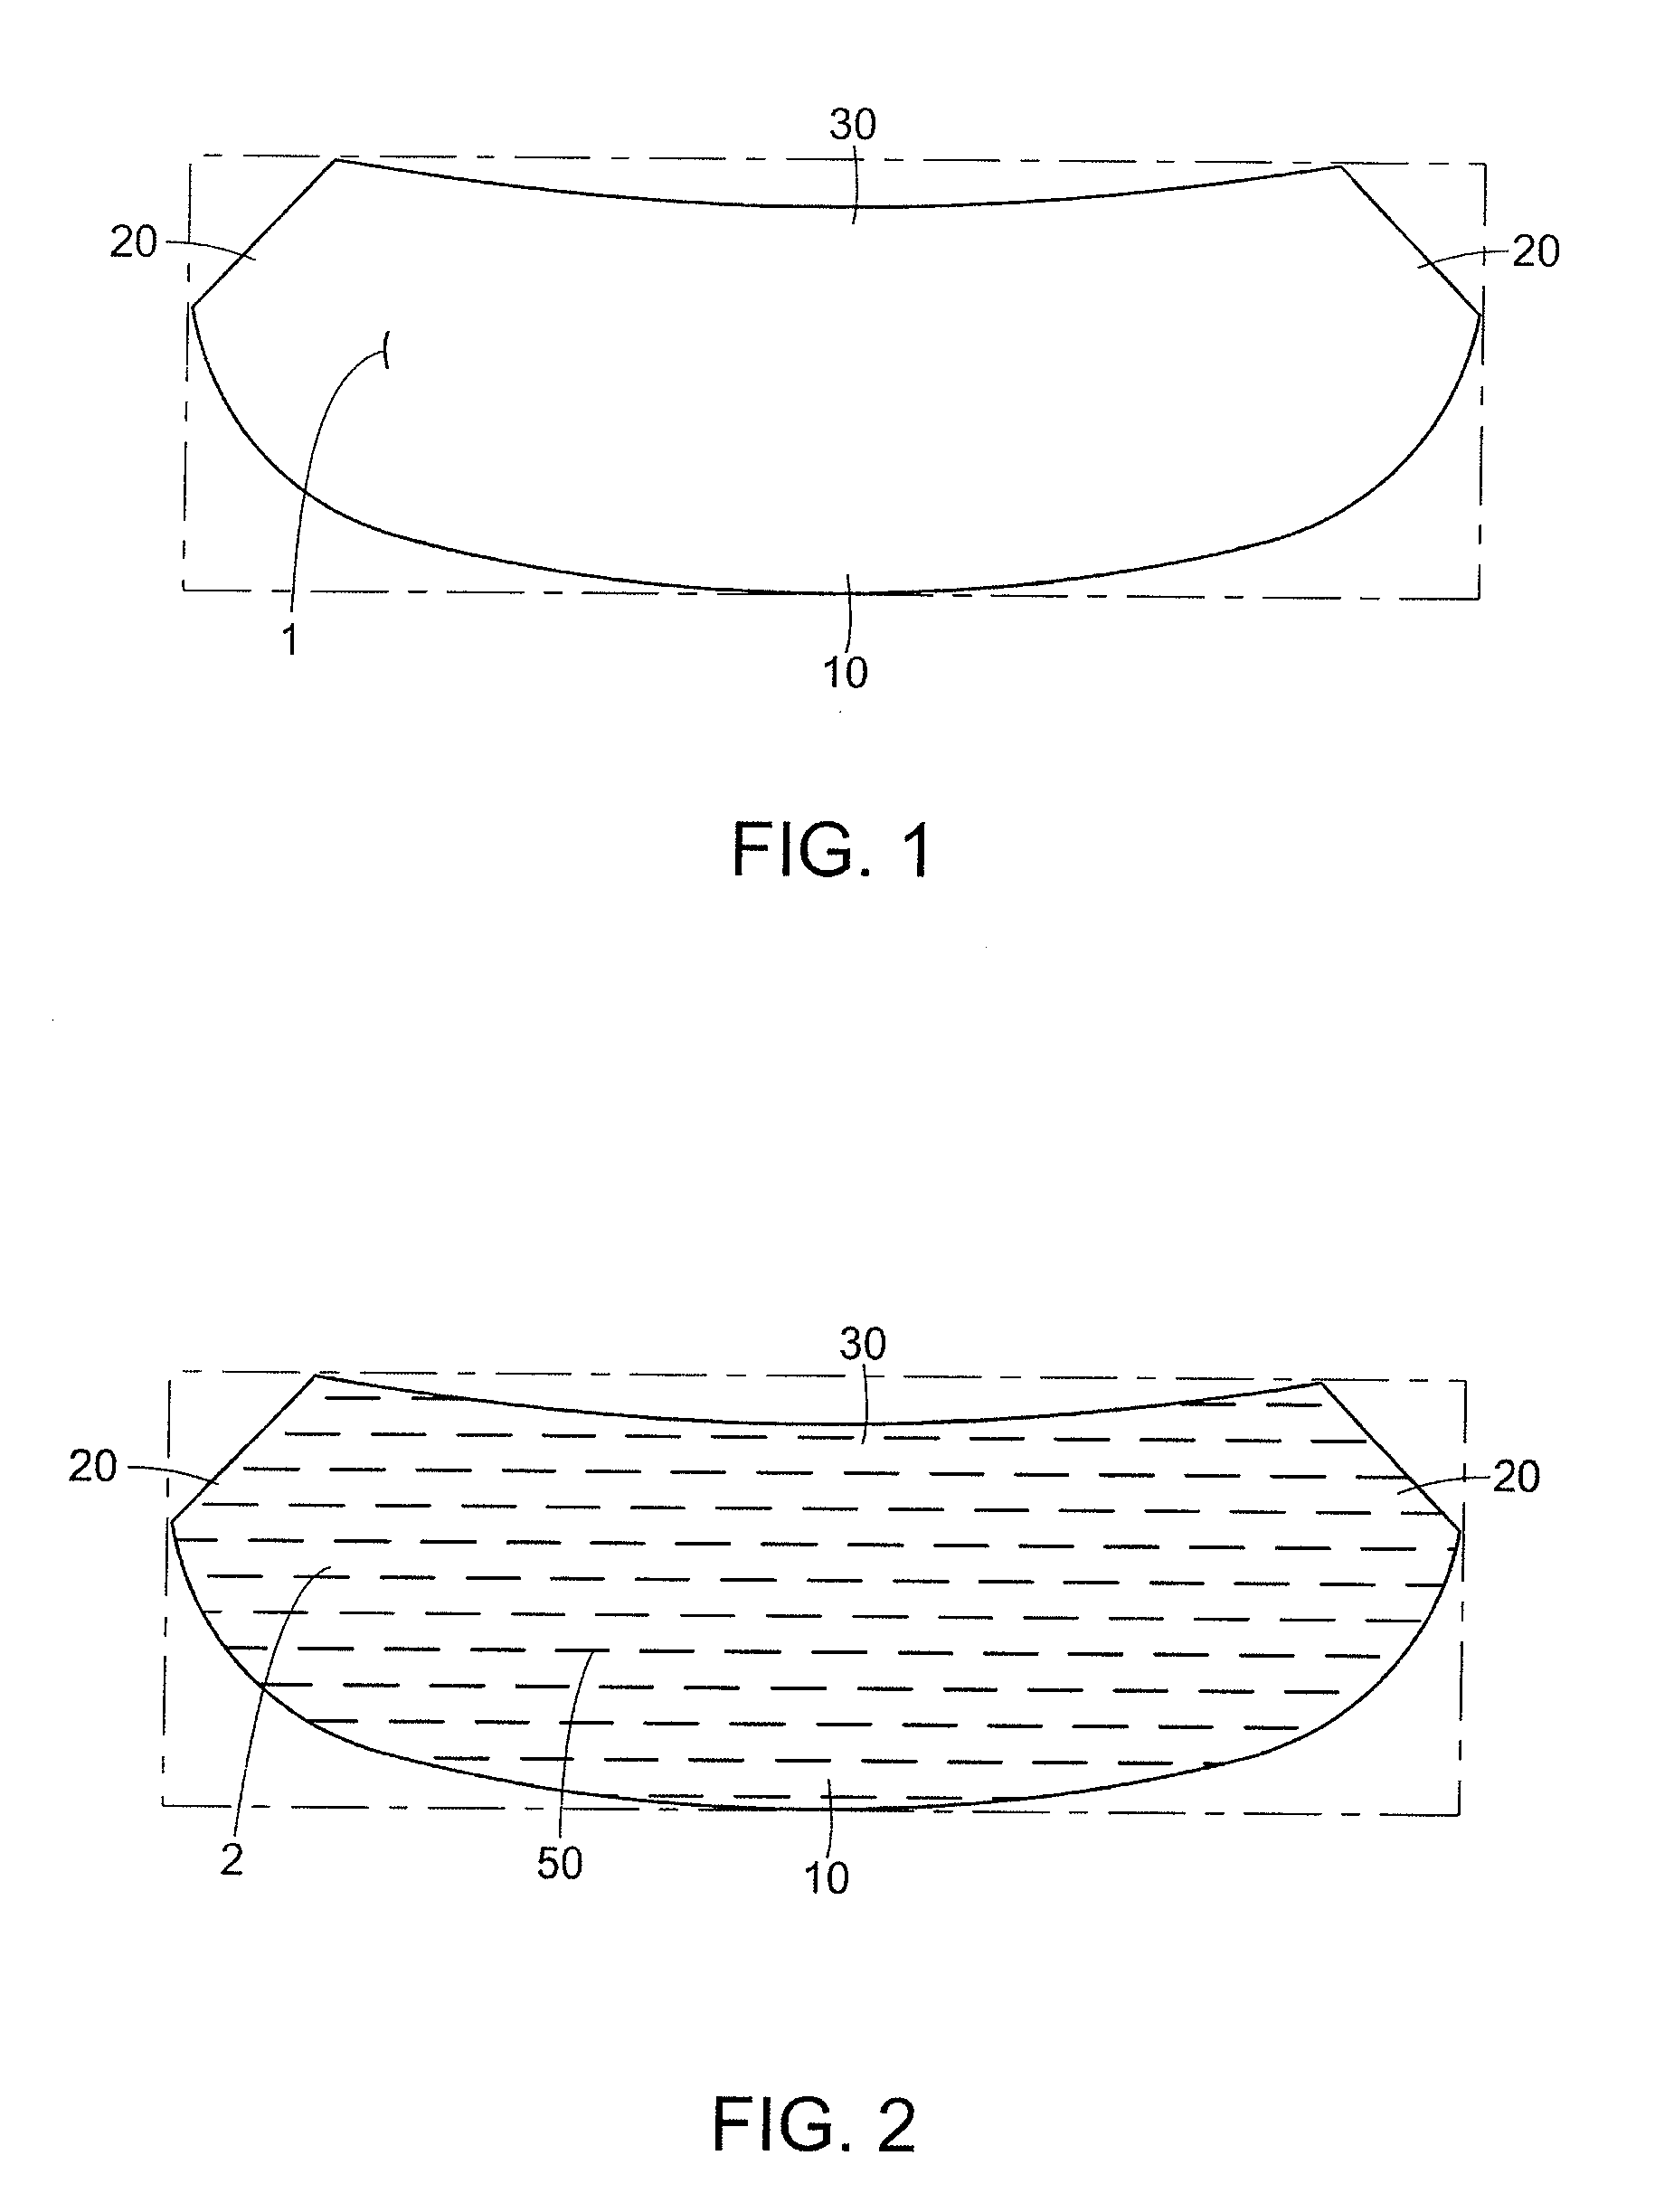 Mastopexy and Breast Reconstruction Prostheses and Method